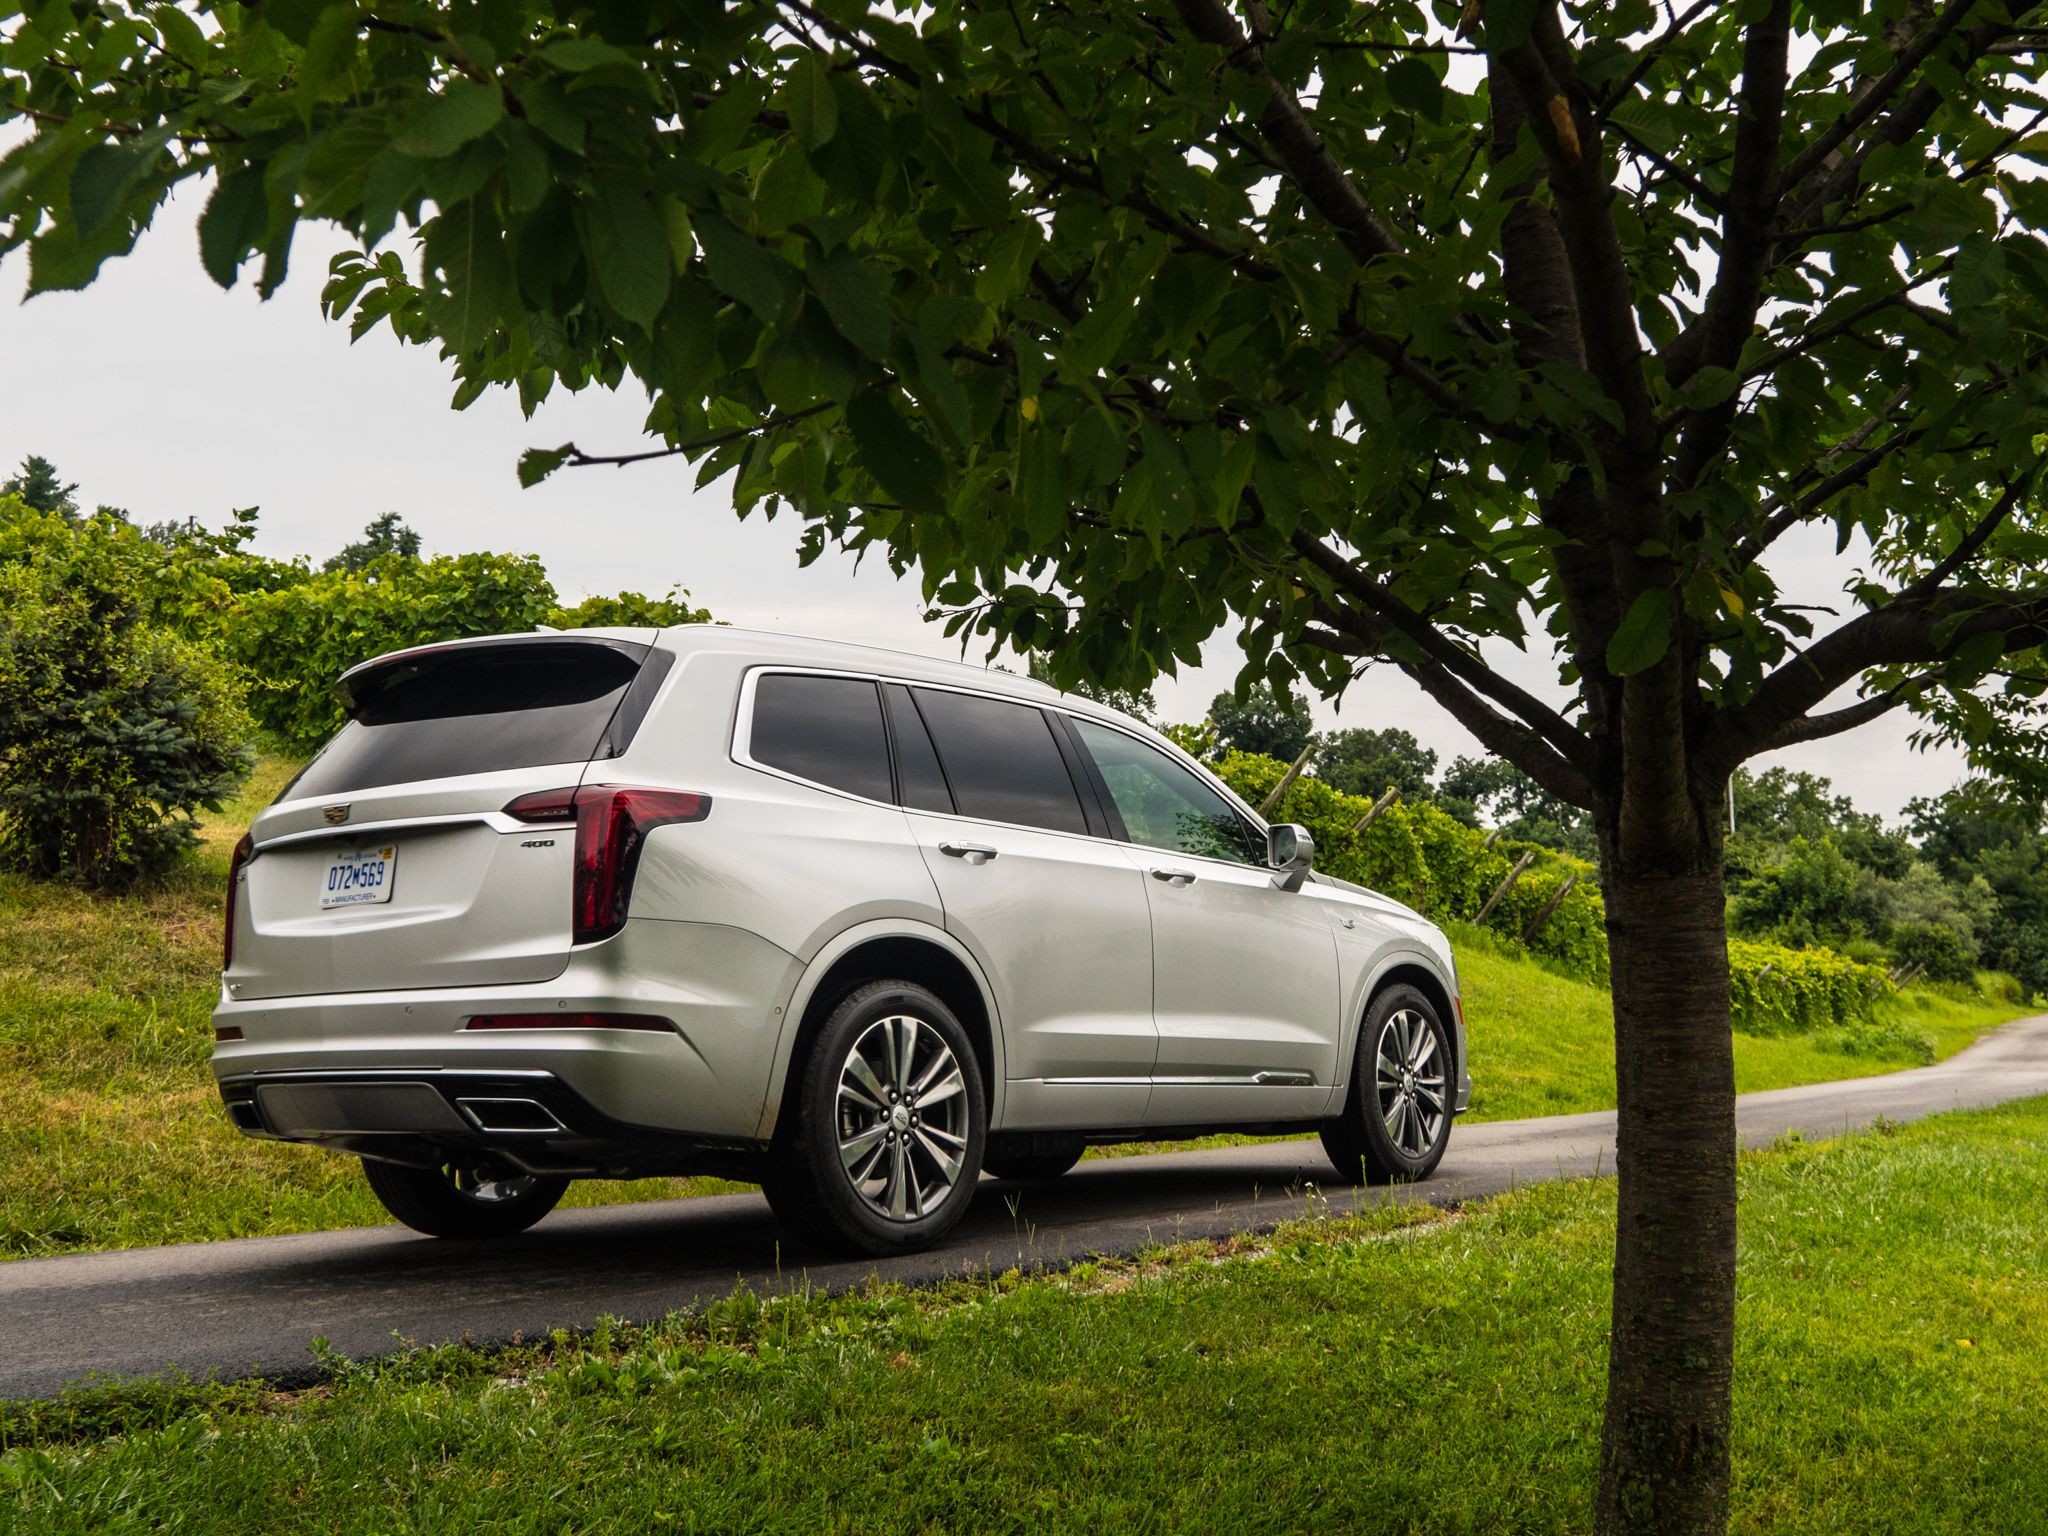 The 2020 Cadillac XT6: Better than an Escalade in every way | Ars Technica